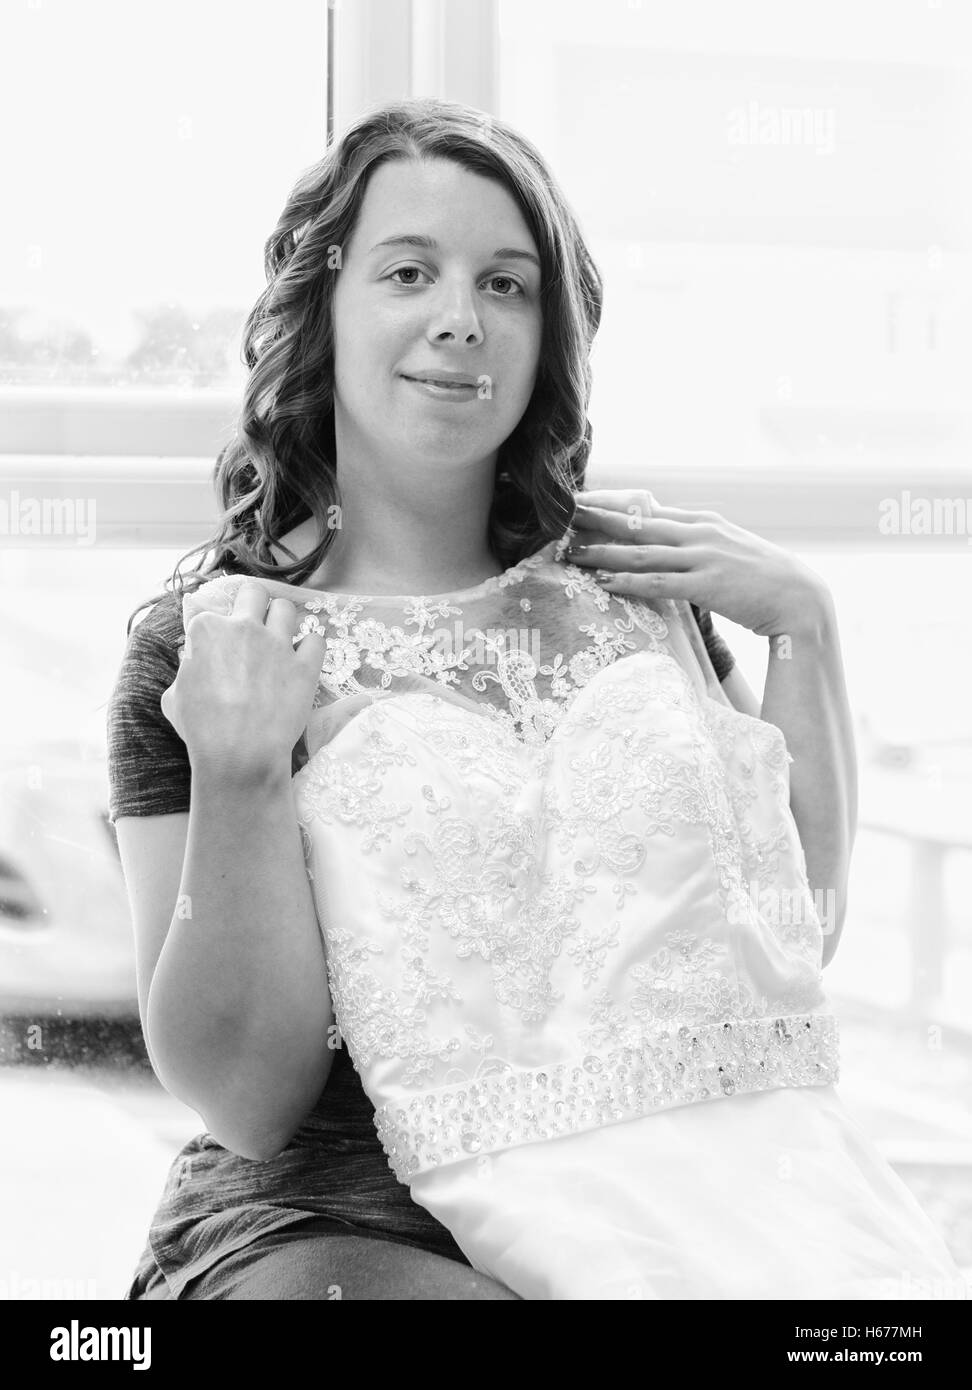 Excited Bride To Be Holding Up Her Wedding Dress Taken In Vertical Format In Black And White